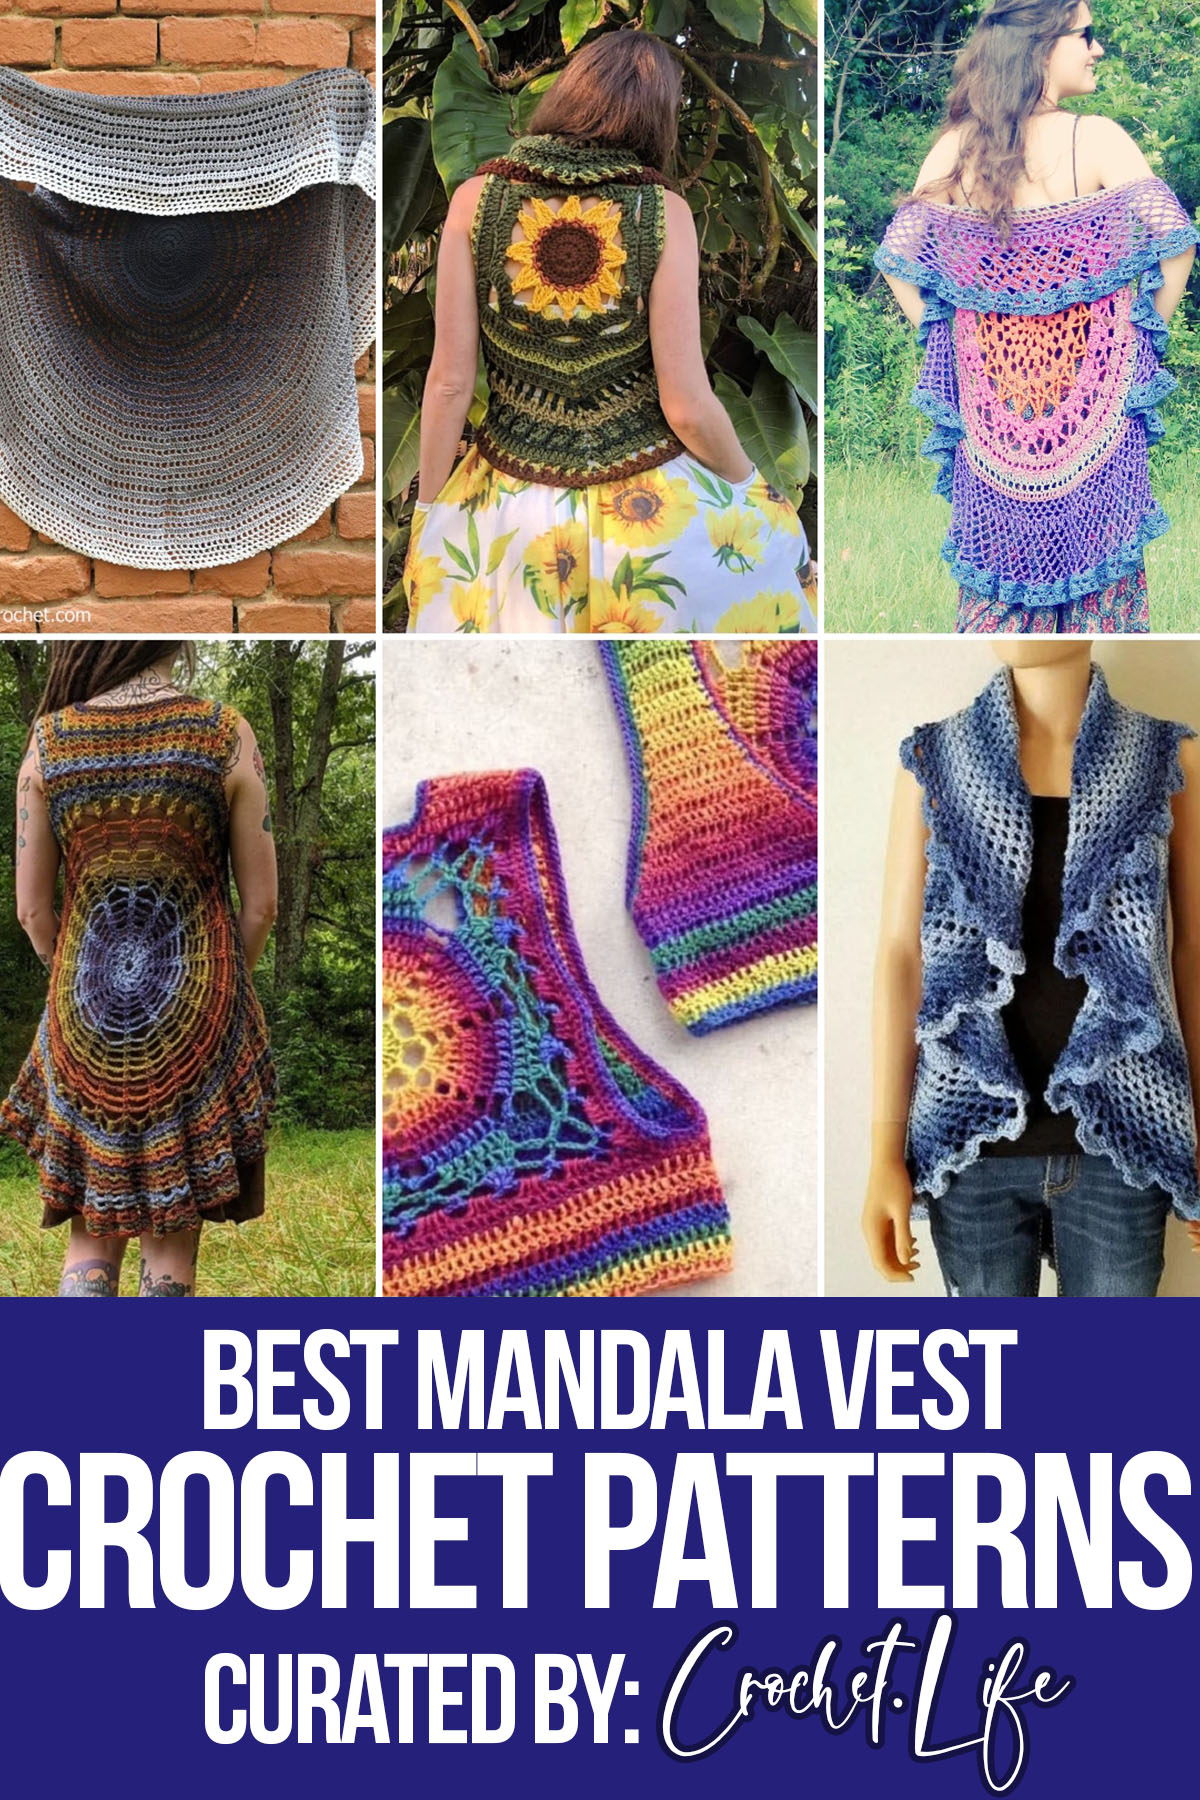 photo collage of crochet patterns for mandala vests with text which reads best mandala vest crochet patterns curated by crochet.life